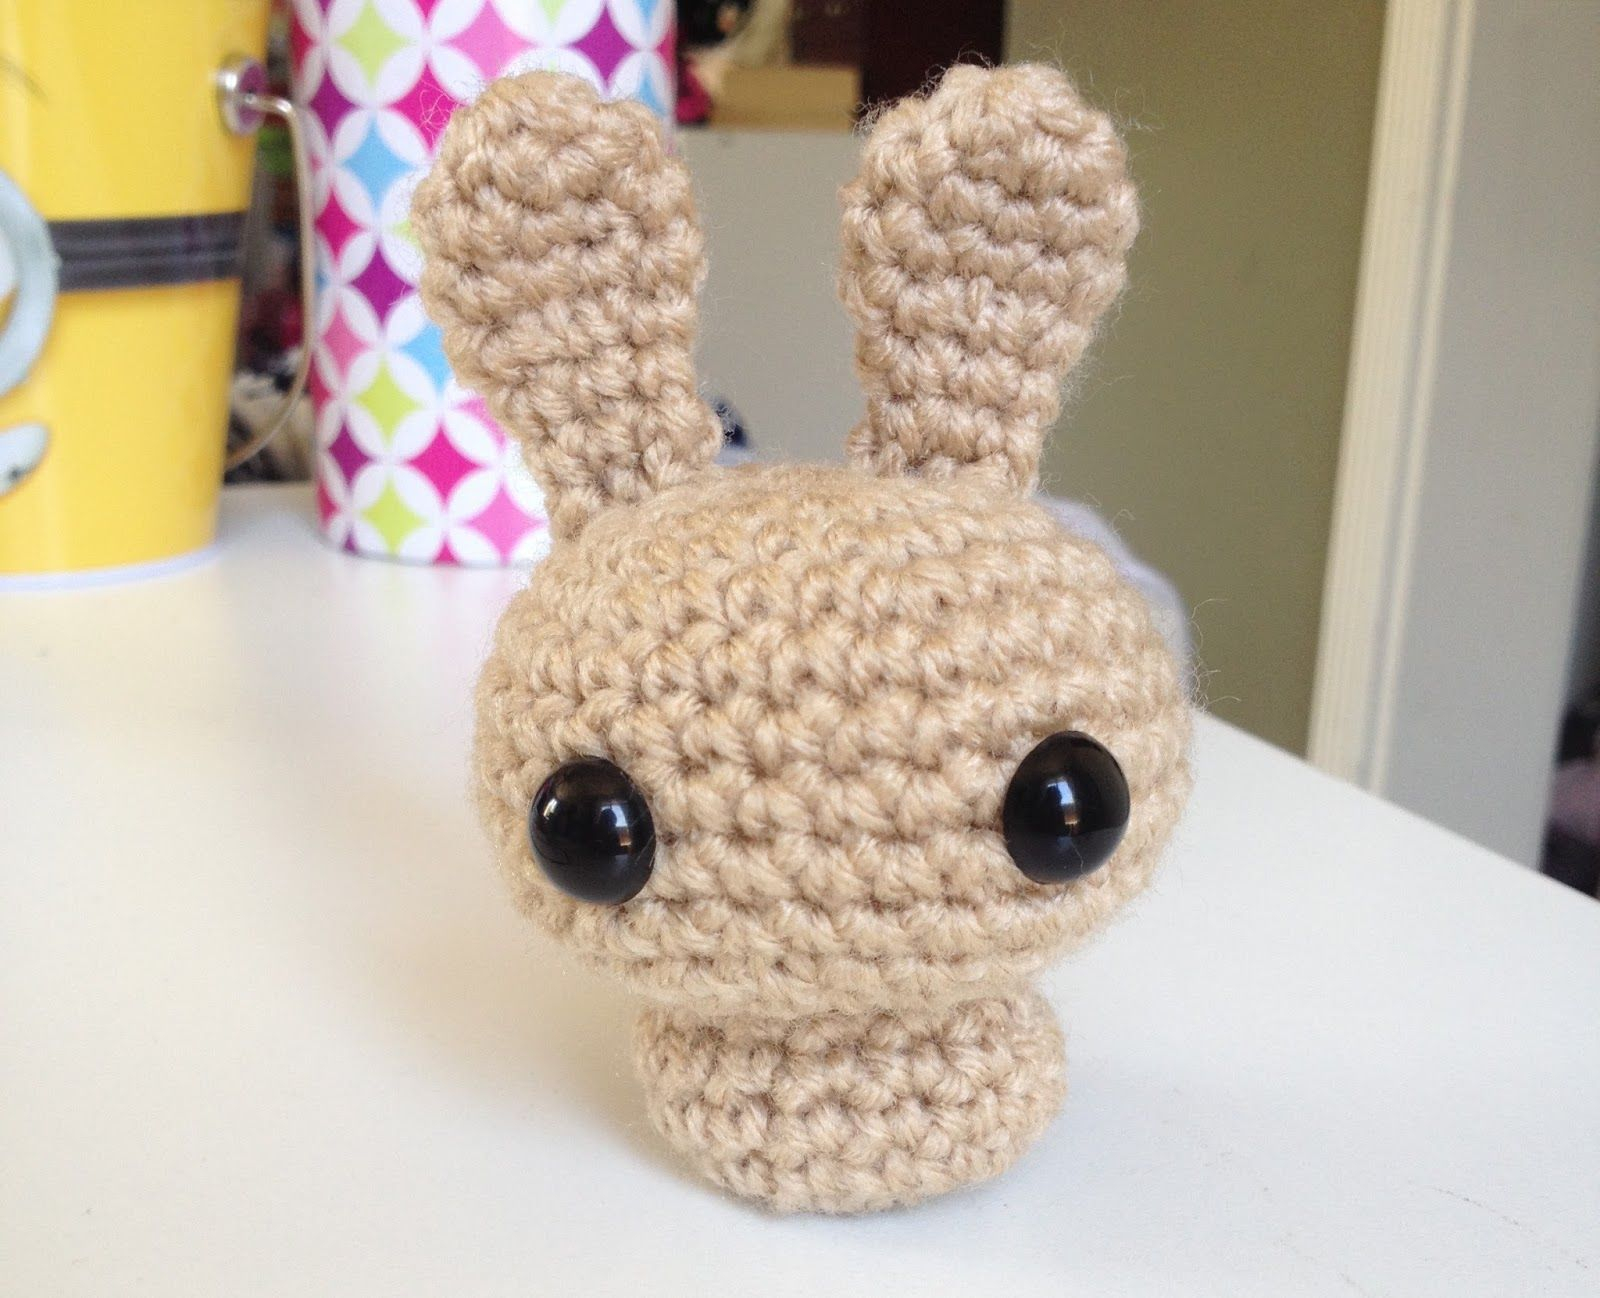 Crochet Bunny Pattern Easy Lately I Created A Mini Series Of My Crochet Animals And Found A